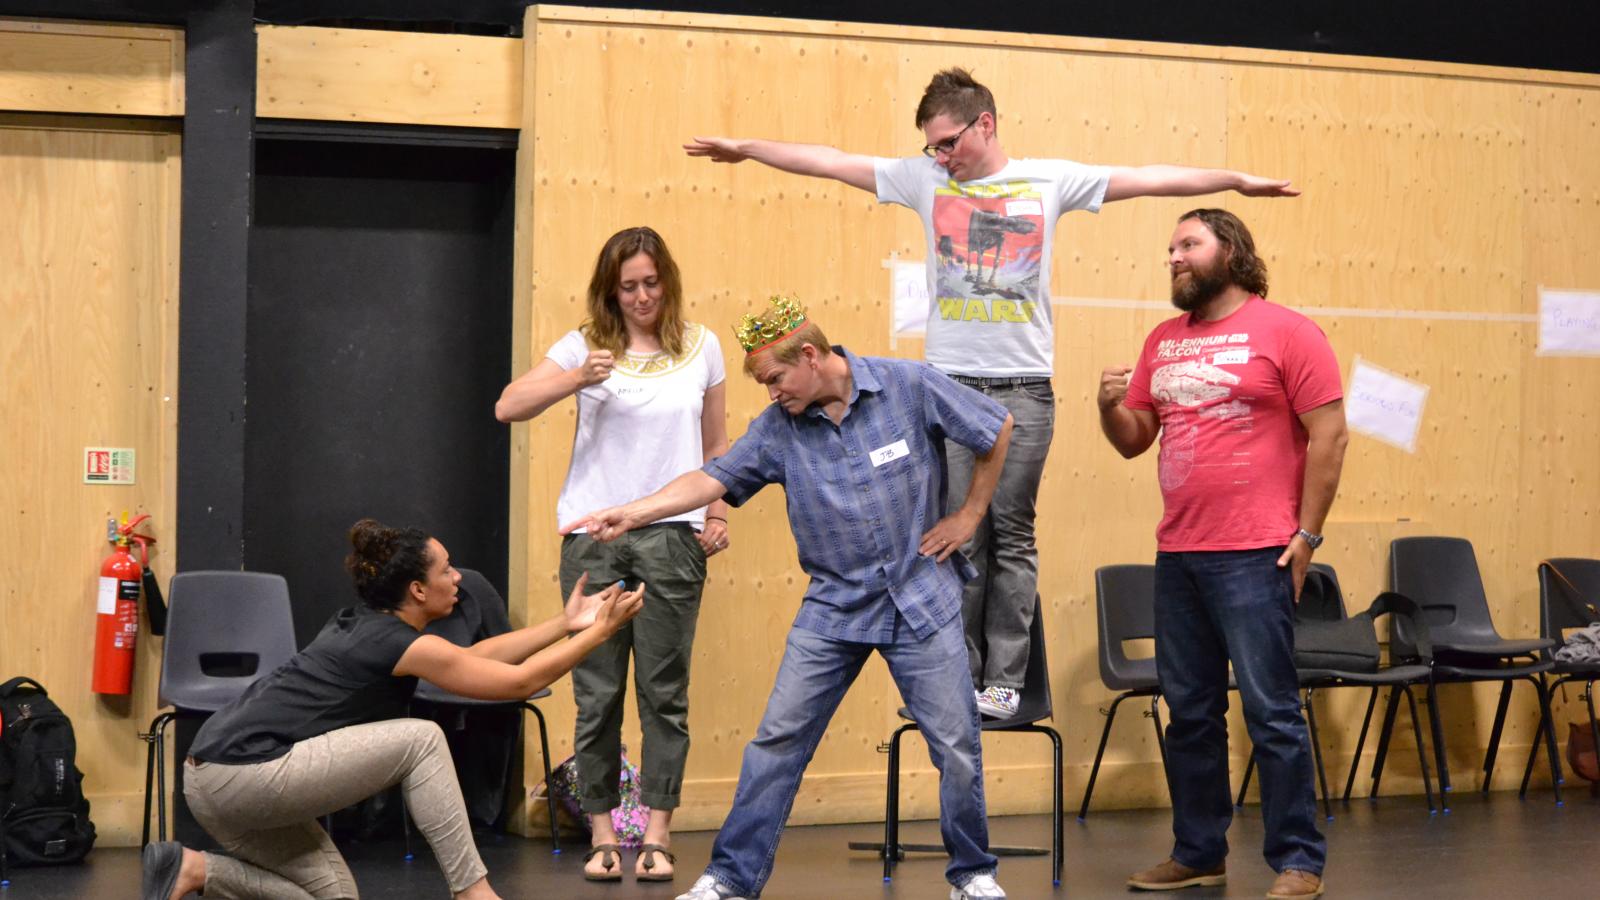 RSC Stand Up for Shakespeare training participants are creating a tableau from Henry IV, Part II.  Left to right: Kayla Jackmon, Amelia Baumgardner, JB Jagerman, Elliot Lemberg, and Johnny Merry-June, 2014, The Clore Learning Center in Stratford-upon-Avon